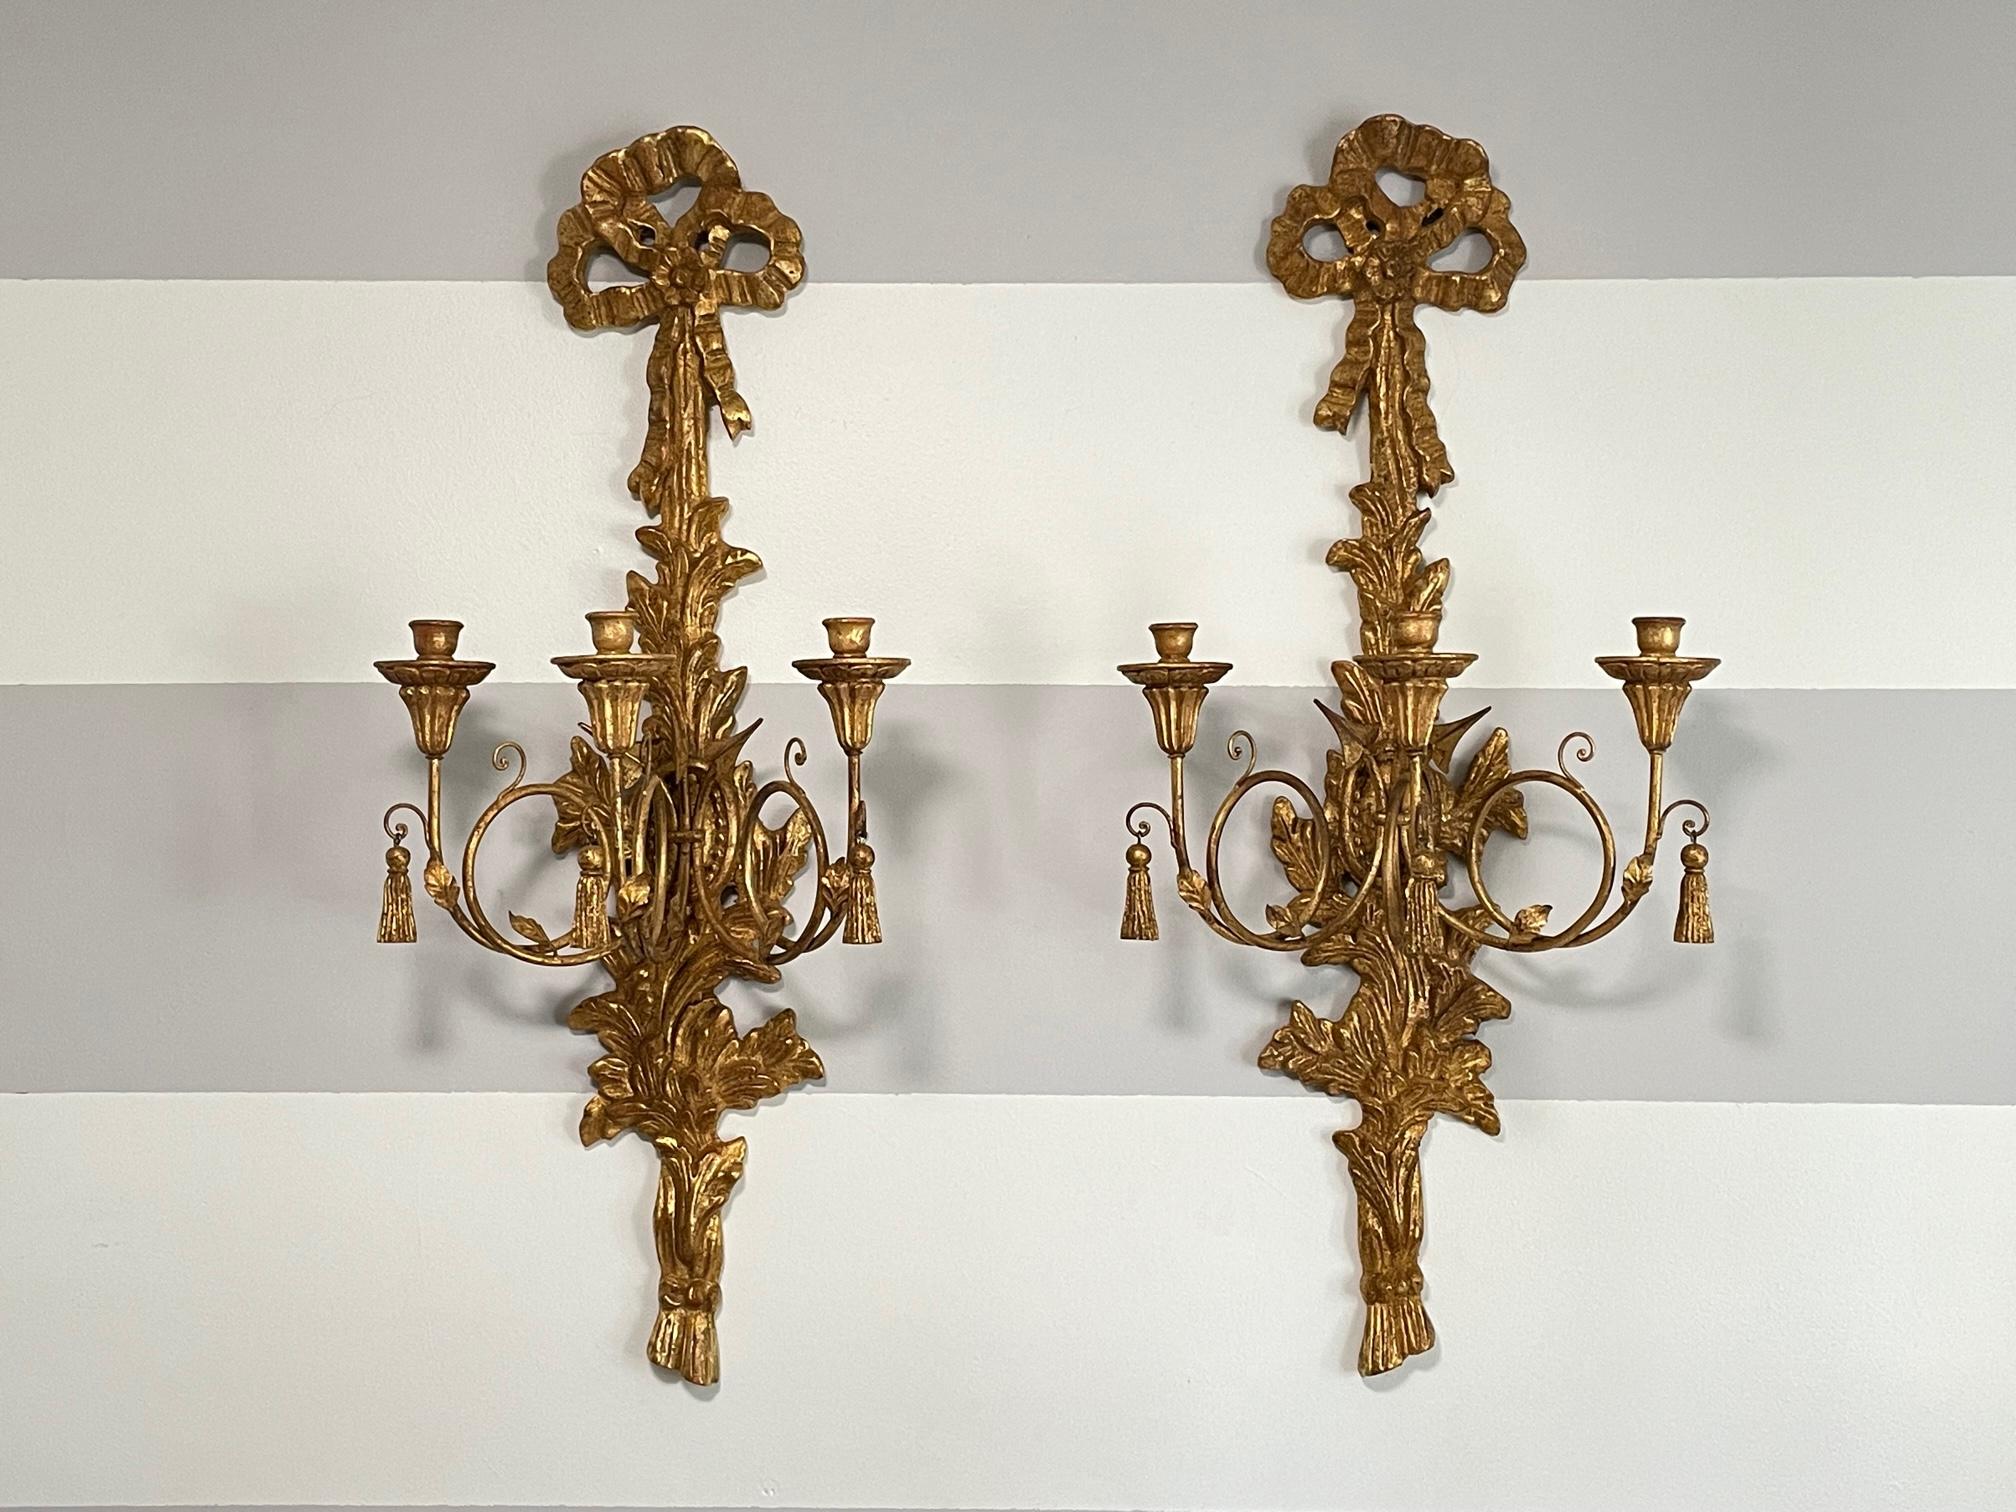 Pair of Italian giltwood candle sconces feature 3 arms and carved in a motif of acanthus leaves, arrows, and bows. Marked 